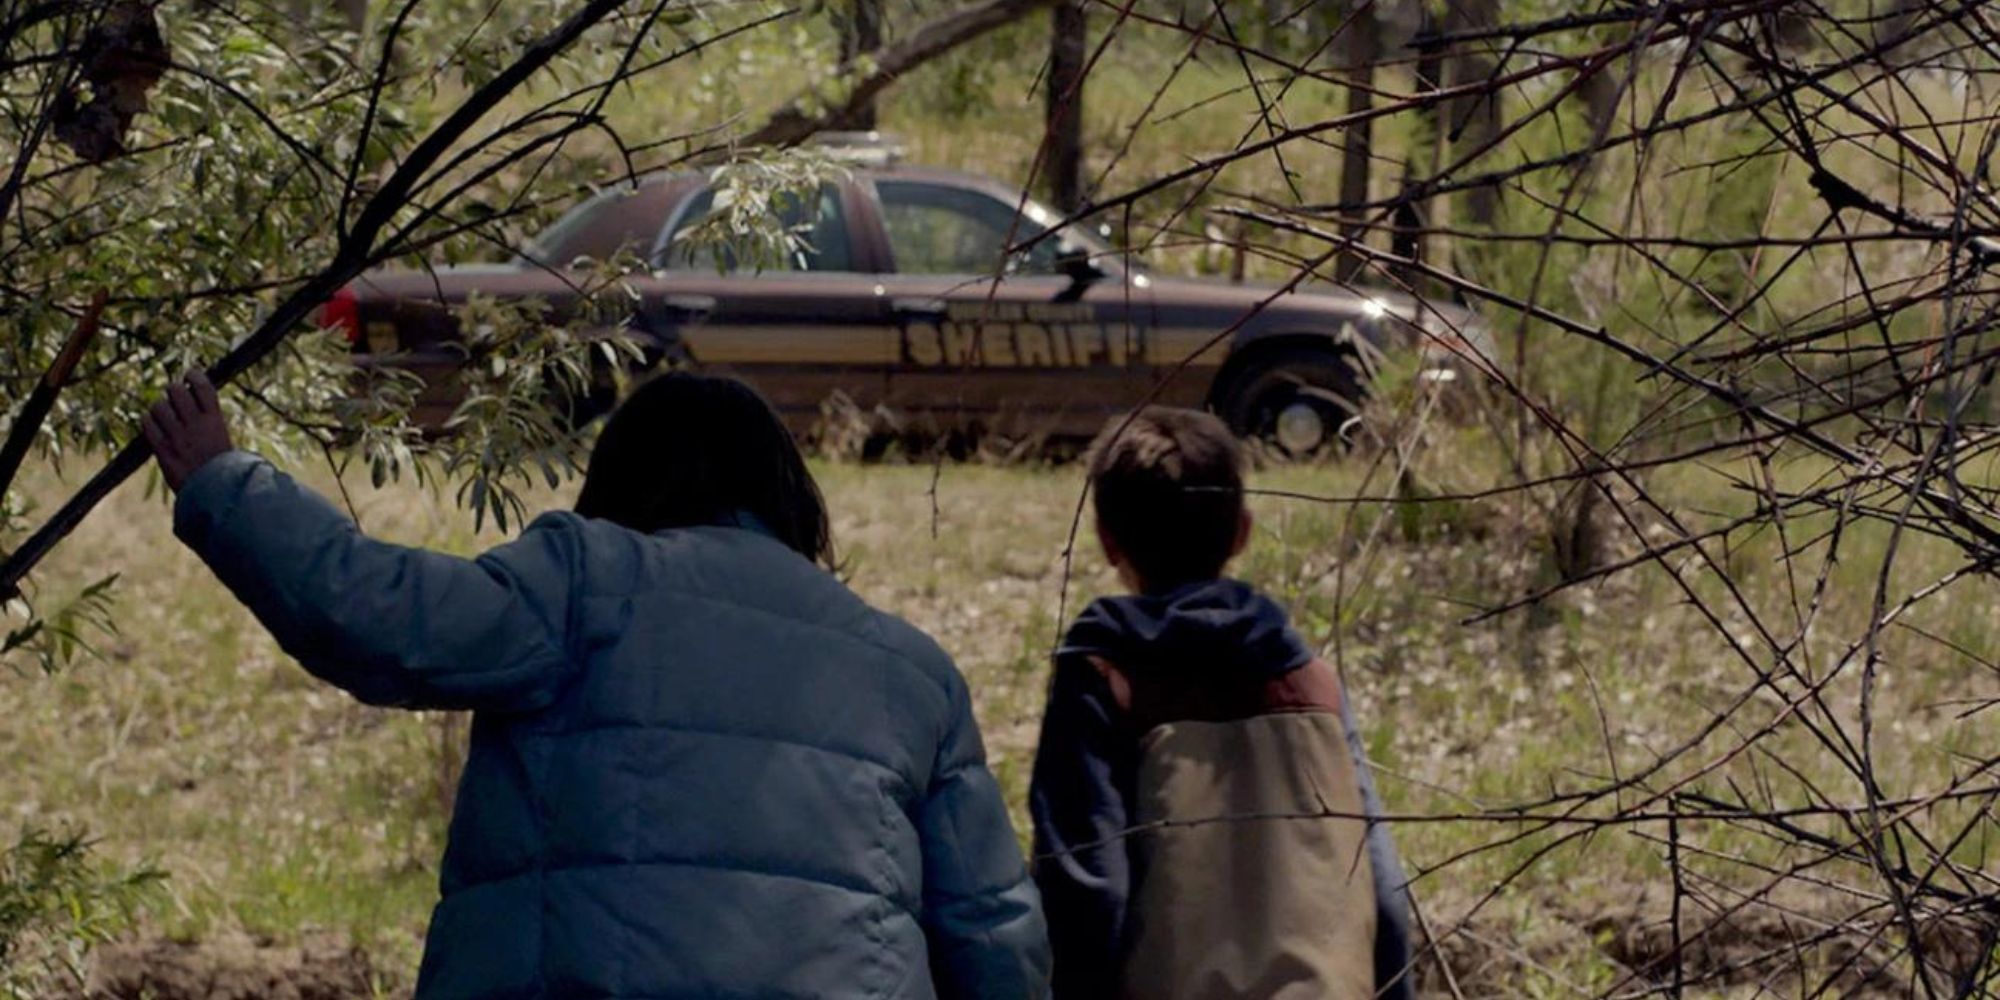 Two young boys discover abandoned cop car in middle of woods